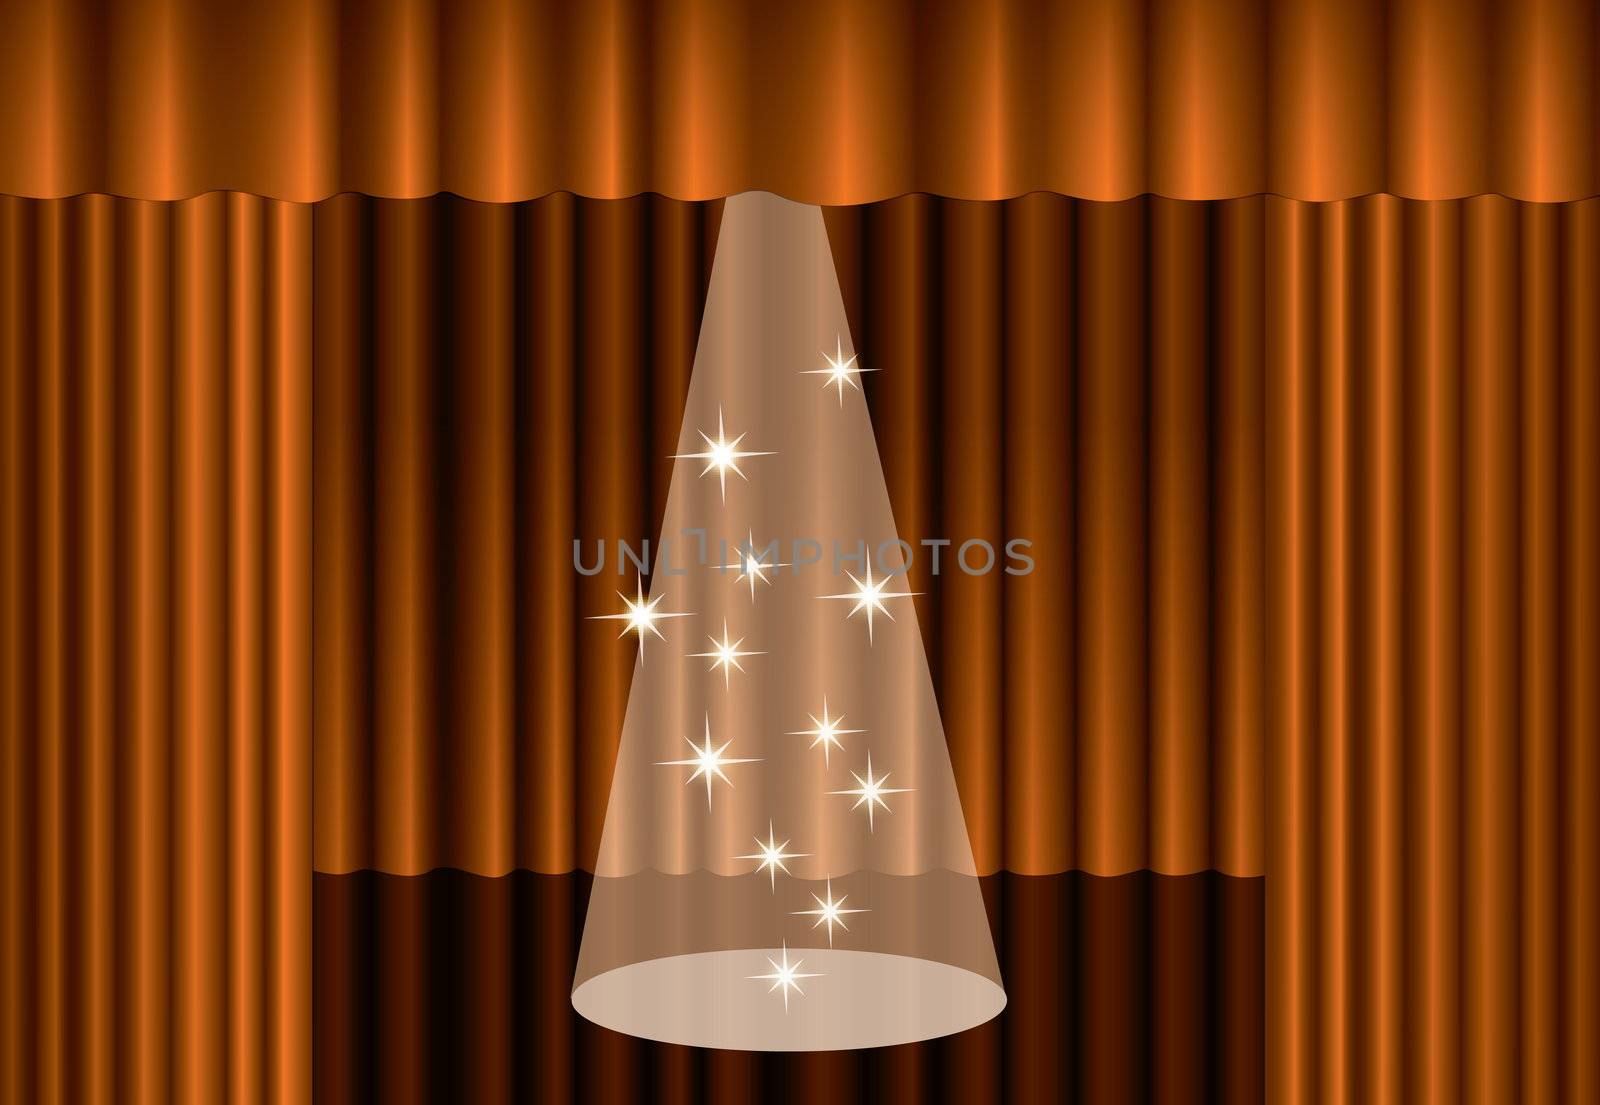 Gold theater curtain with spotlight on stage, by svtrotof